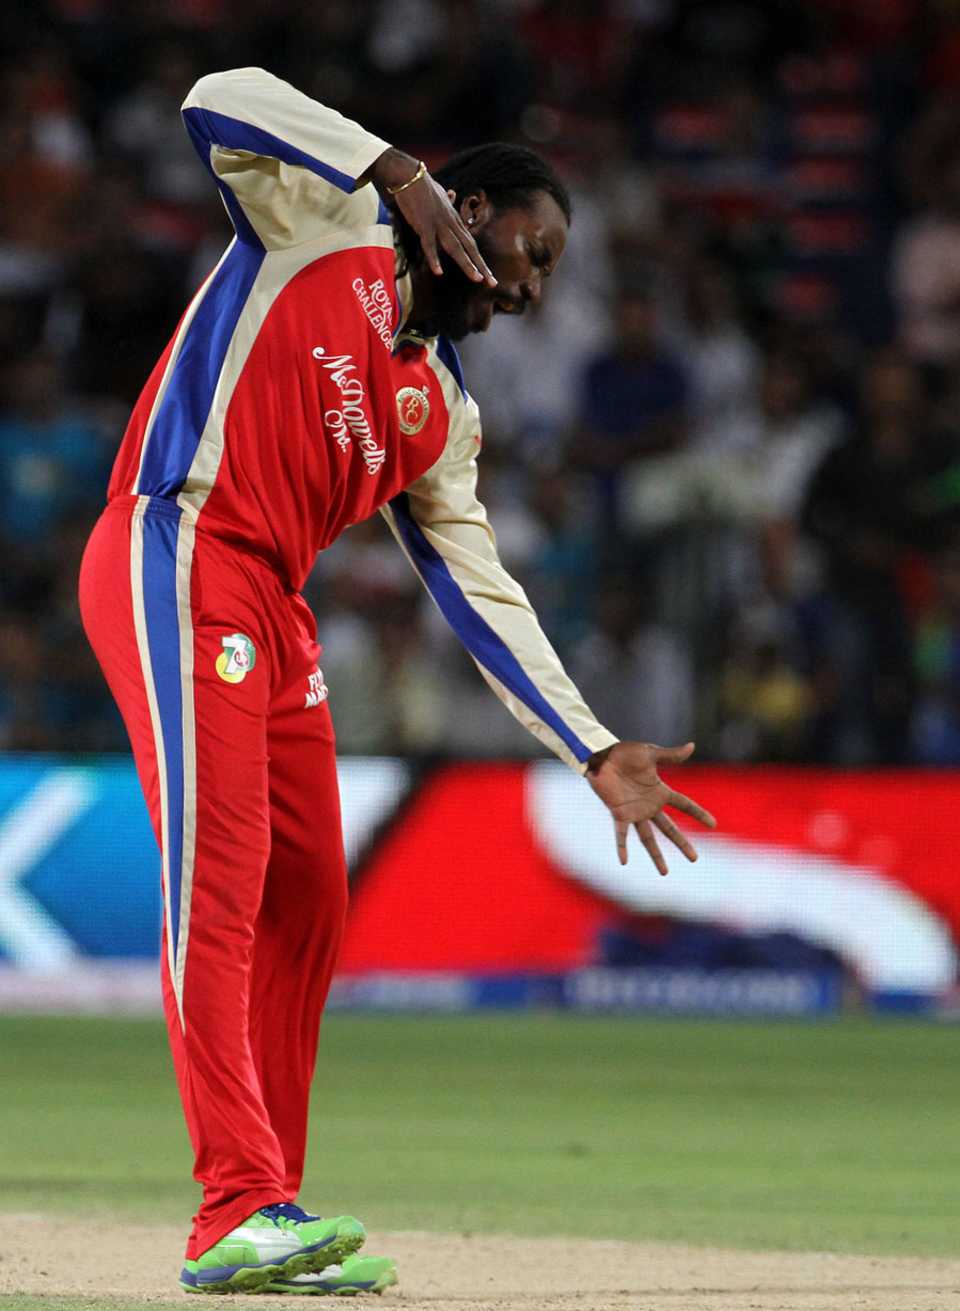 Chris Gayle pulls out another of his unique celebrations, Pune Warriors v Royal Challengers Bangalore, IPL 2013, Pune, May 2, 2013